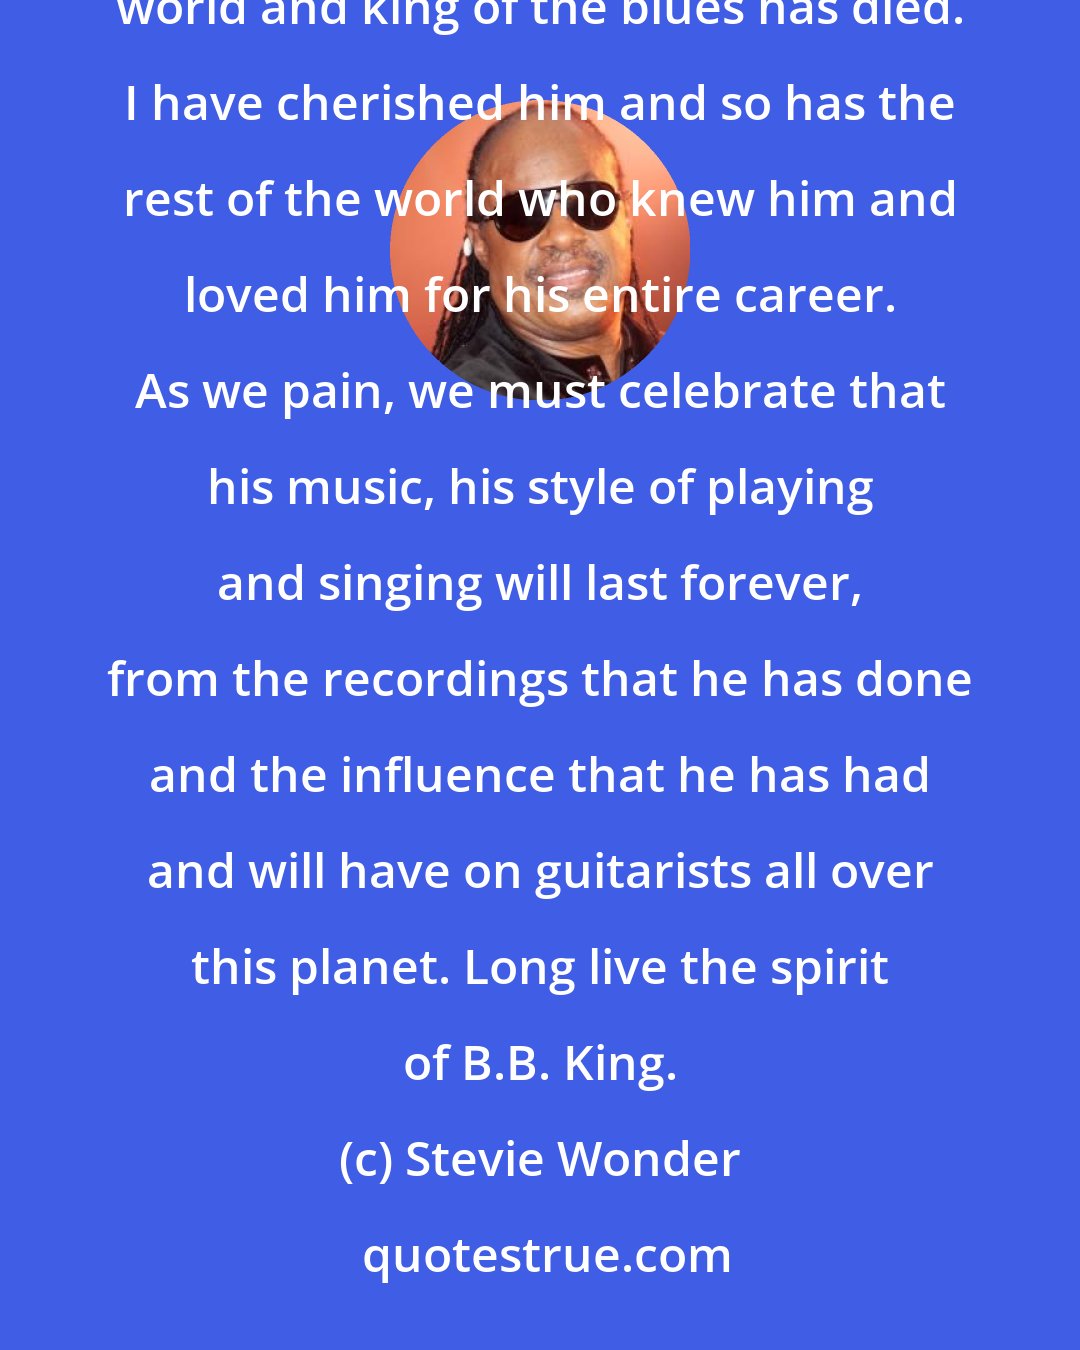 Stevie Wonder: The musical flags of the world should fly at half mast because truly one of the greatest guitarists in the world and king of the blues has died. I have cherished him and so has the rest of the world who knew him and loved him for his entire career. As we pain, we must celebrate that his music, his style of playing and singing will last forever, from the recordings that he has done and the influence that he has had and will have on guitarists all over this planet. Long live the spirit of B.B. King.